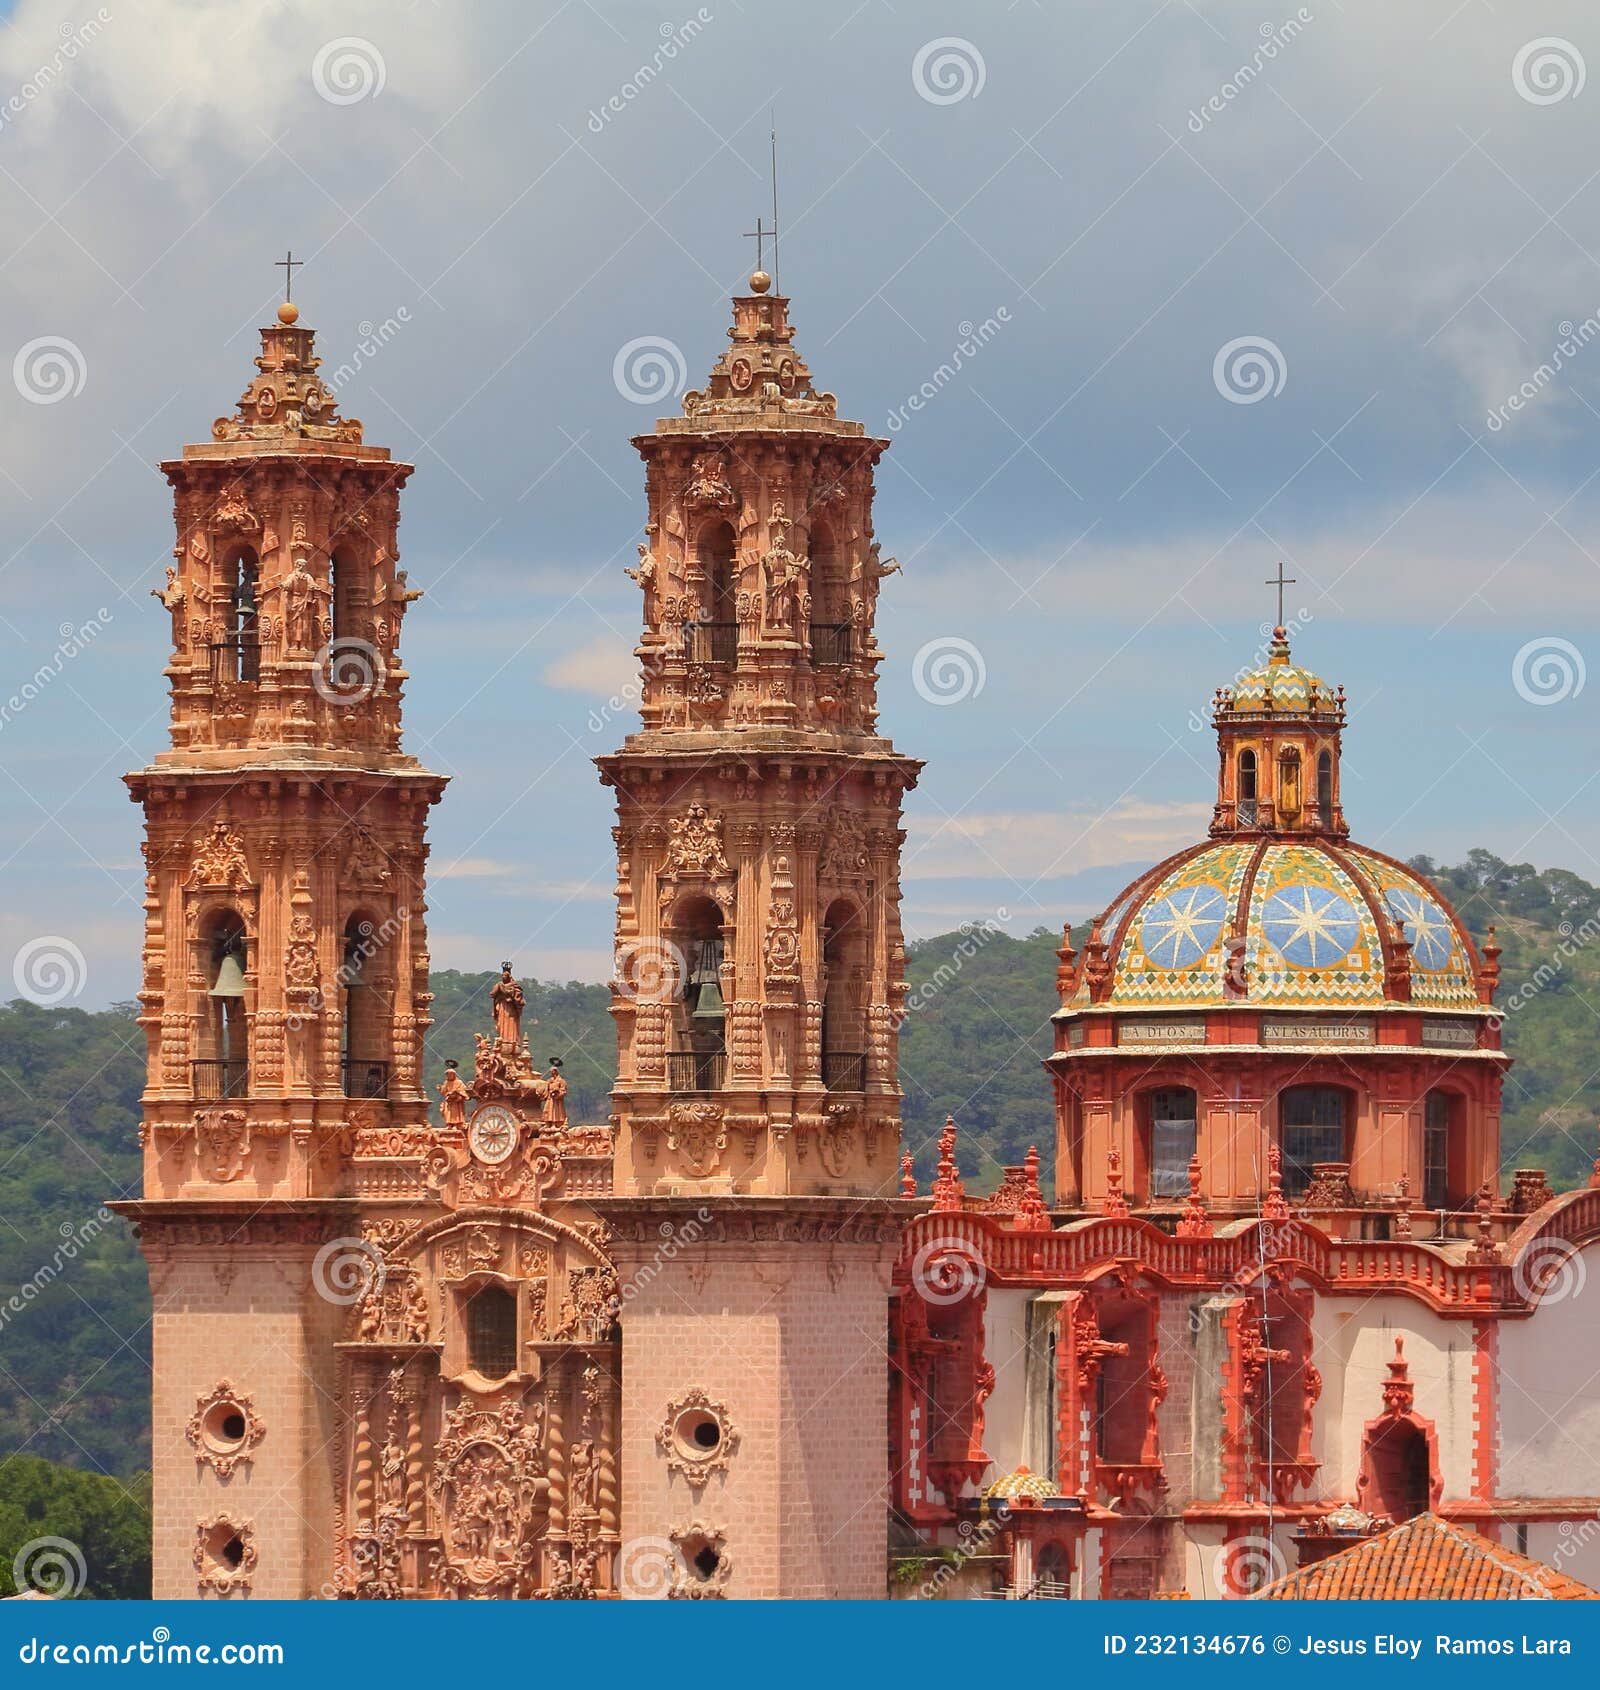 famous cathedral of santa prisca in taxco city, in guerrero v